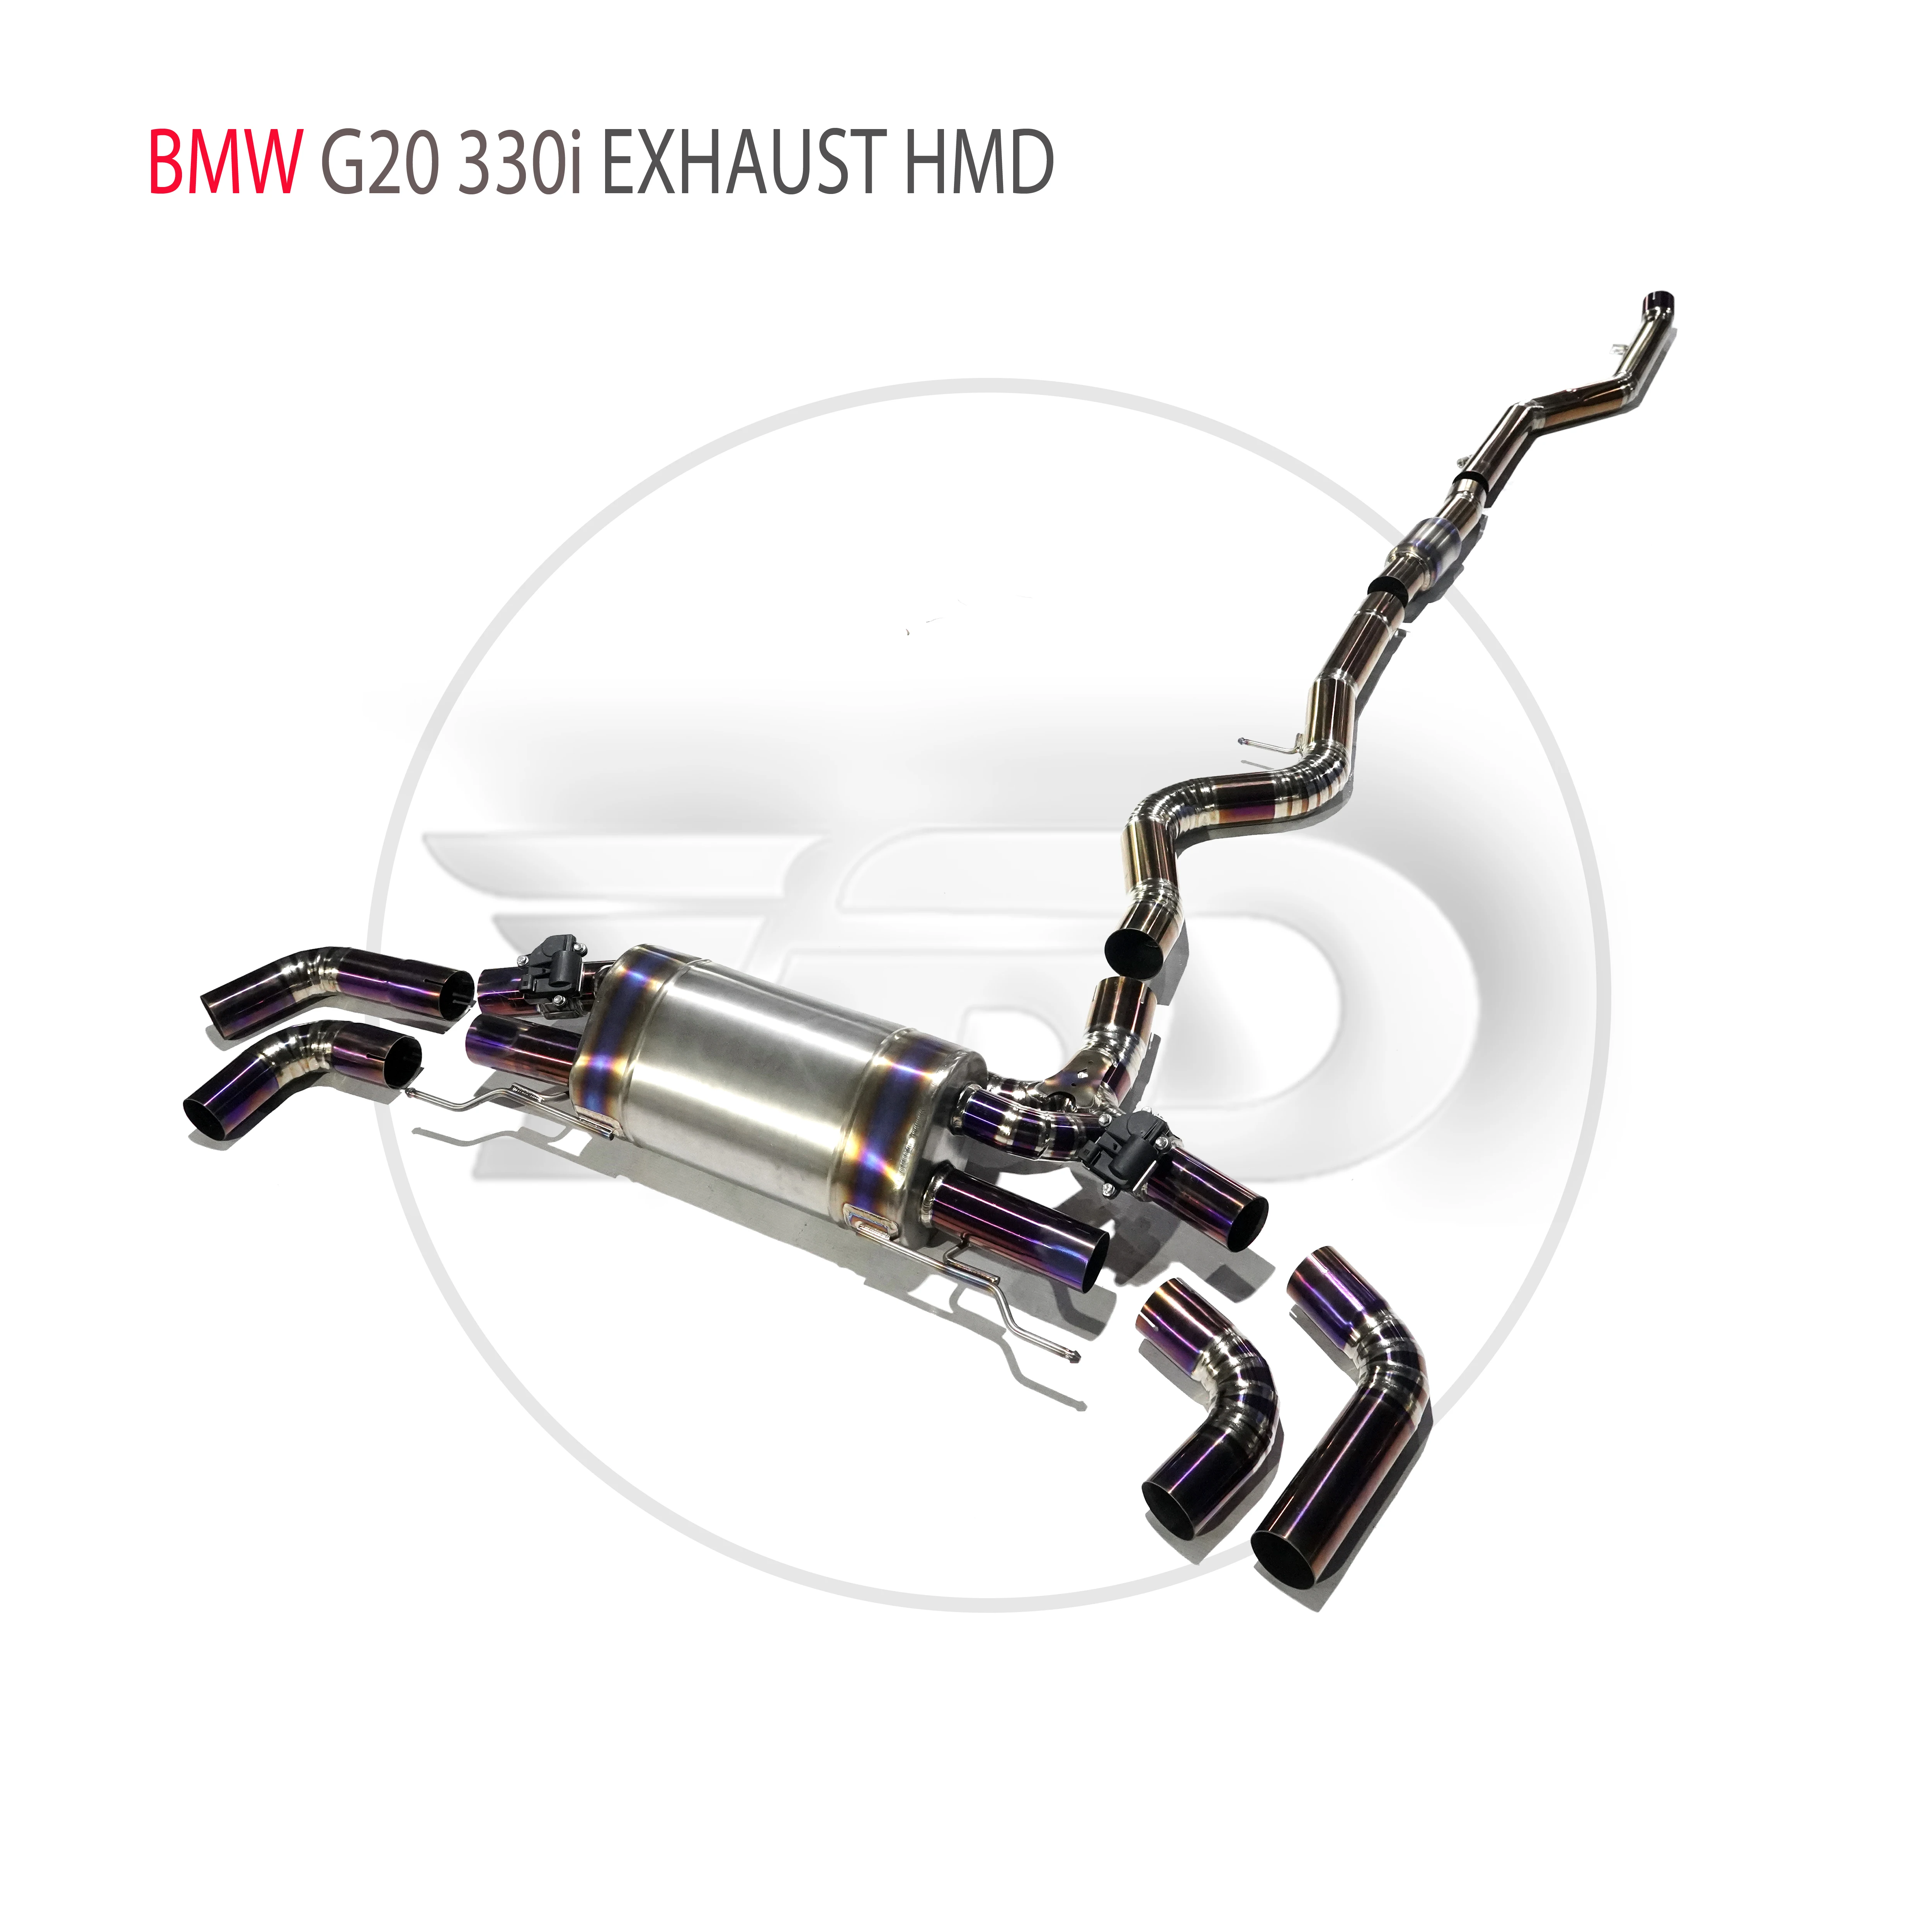 

HMD Titanium Alloy Exhaust System Catback Is Suitable For BMW 330i 325i 328i G20 3 Series Auto Modification Electronic Valve